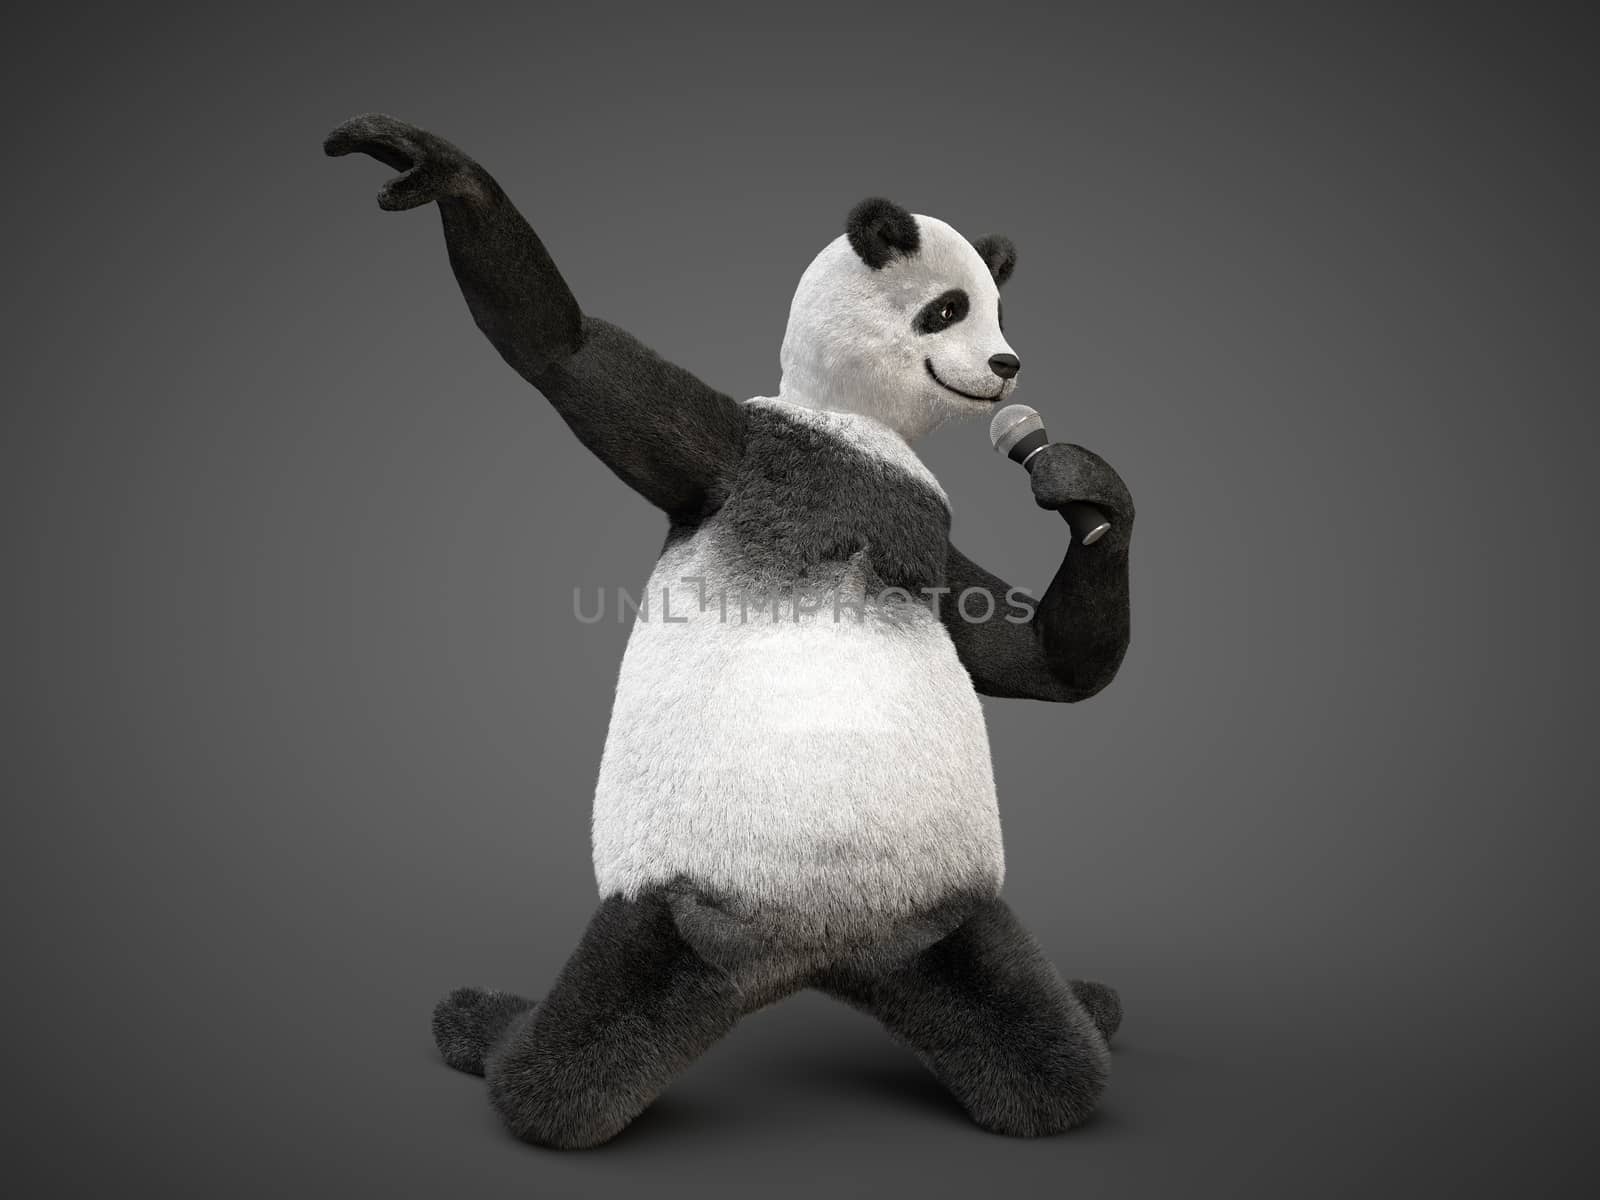 singer personage illustration giant panda bamboo kneeling and holding mic to his mouth, pretending sing. illustration about counterfeit performances phonogram. Plush toy closed mouth pretends sing